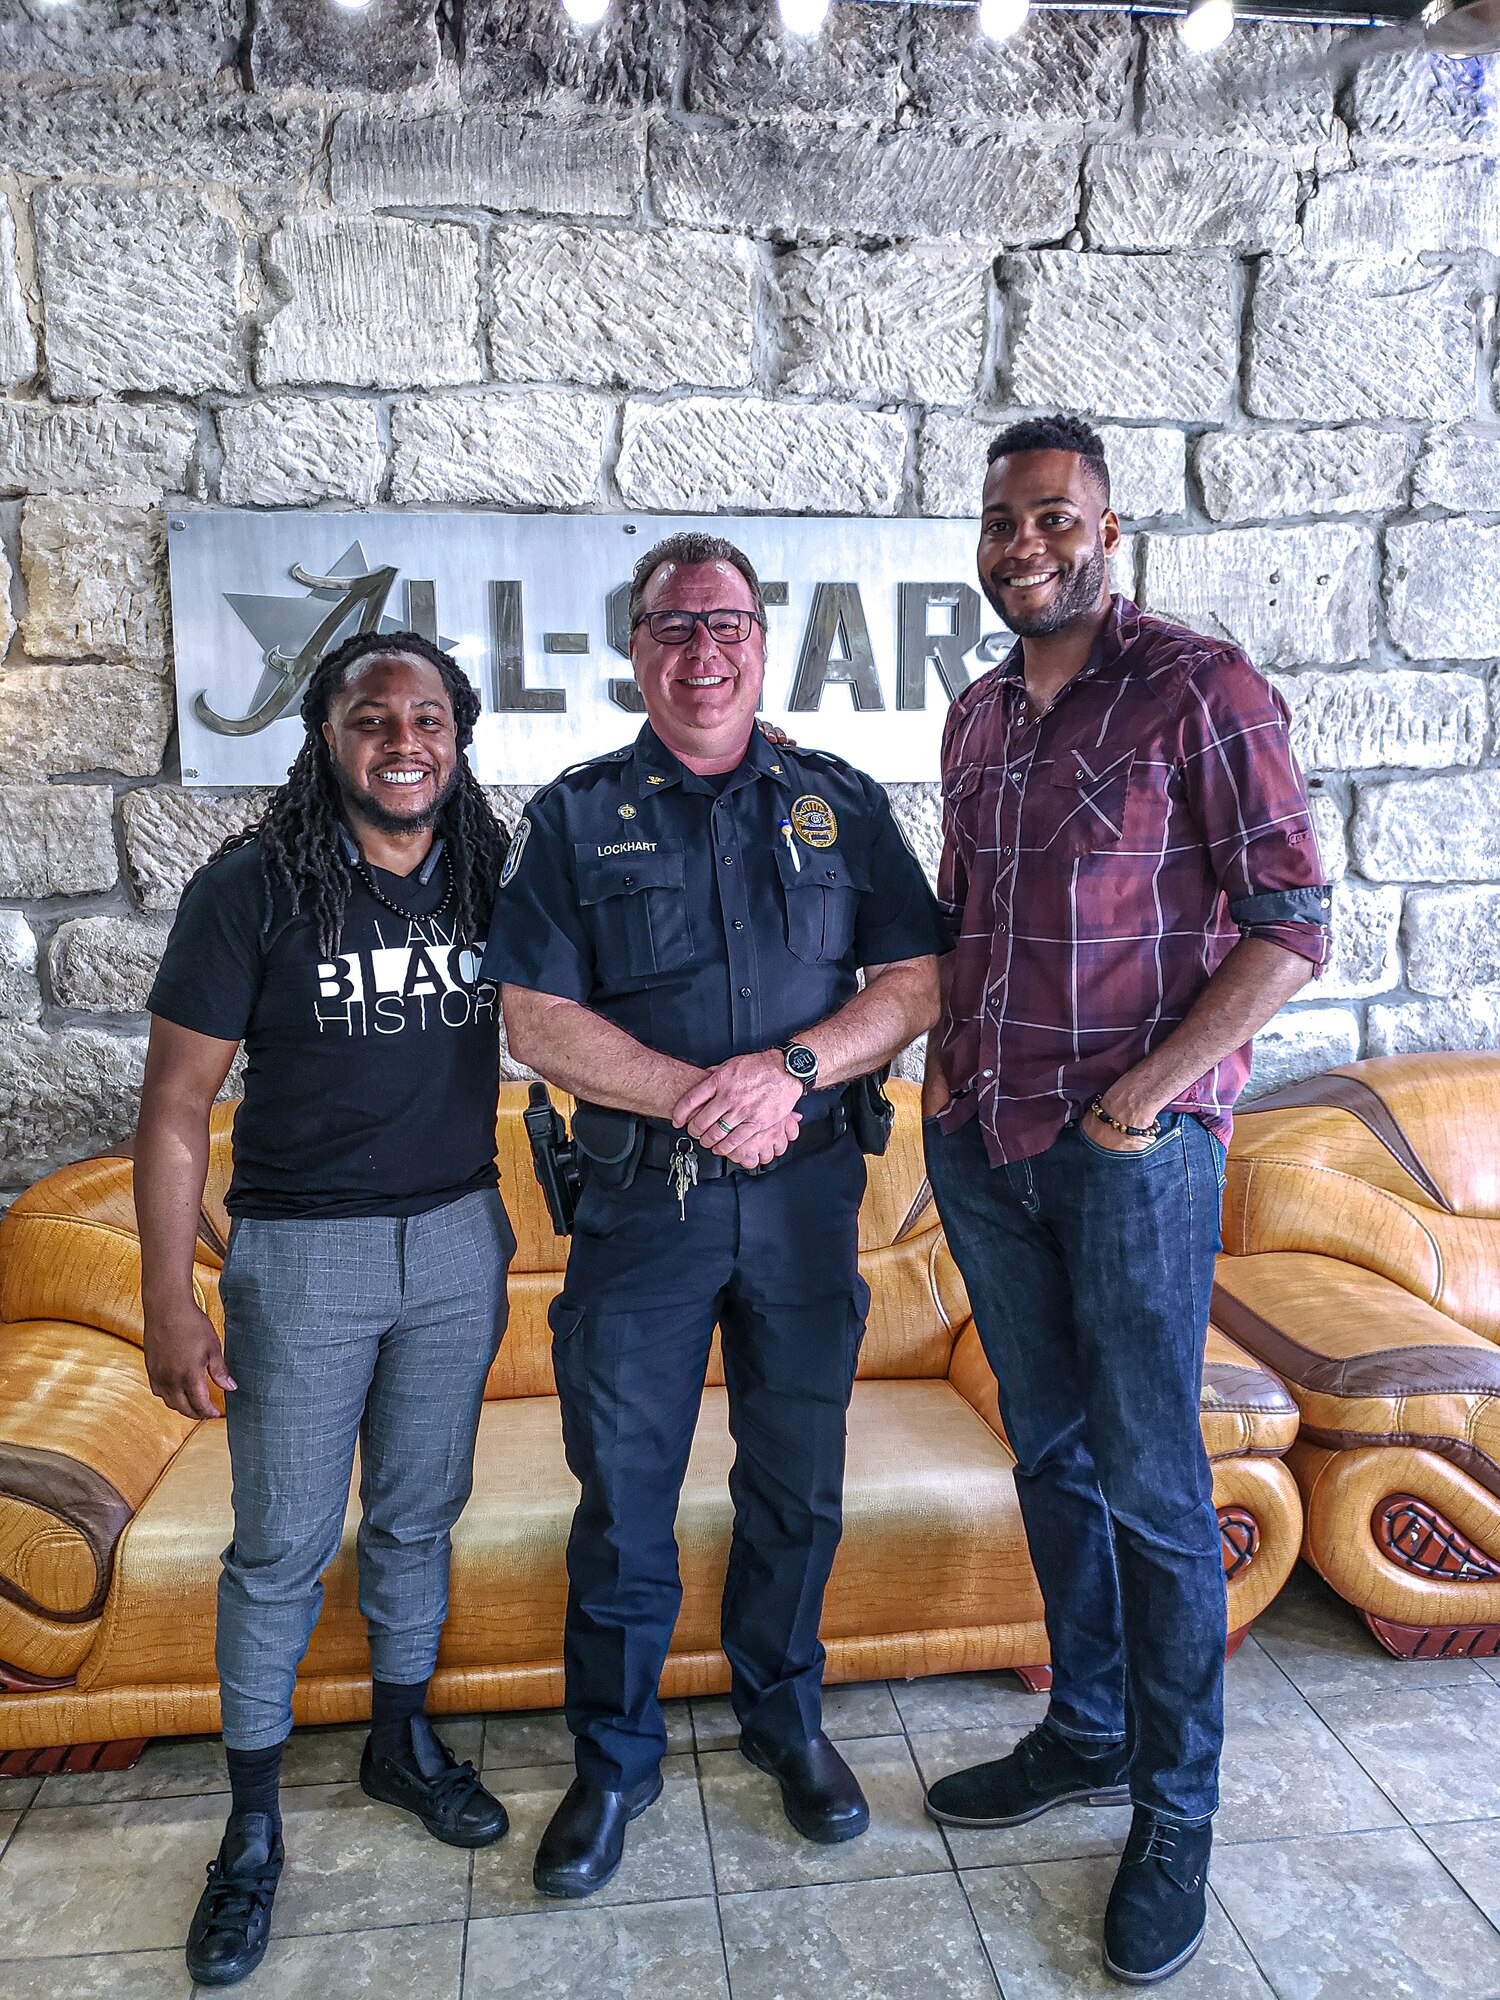 Will Taylor, left, a barbershop owner, Chief Rich Lockhart, center, the Warrensburg, Missouri, Chief of Police, and Staff Sgt. Jarrod Peterson, a 72nd Test and Evaluation Squadron software engineer, take a photo, at Warrensburg, Missouri. Taylor, Lockhart and Peterson worked together to come up with an idea to bring the community closer together. (Courtesy Photo)